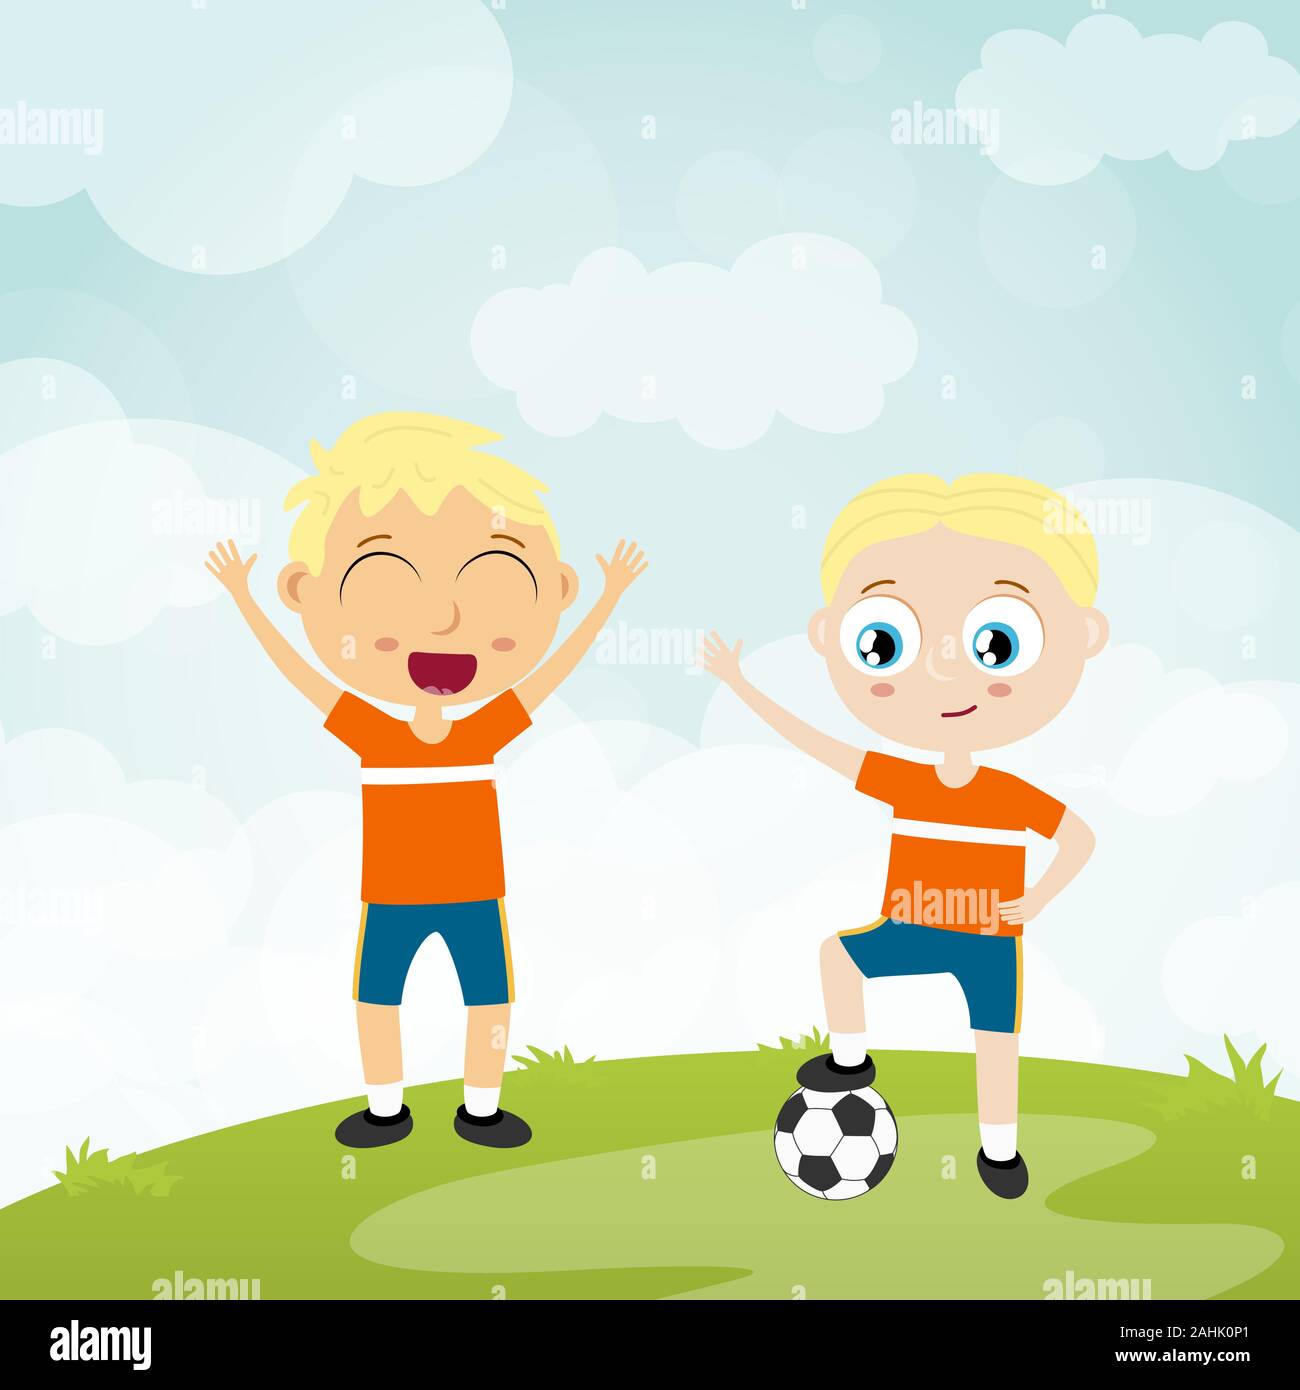 EPS10 vector file showing happy young kids football team players with white skin colors, boys laughing, hopping, playing ball together in front of sum Stock Vector